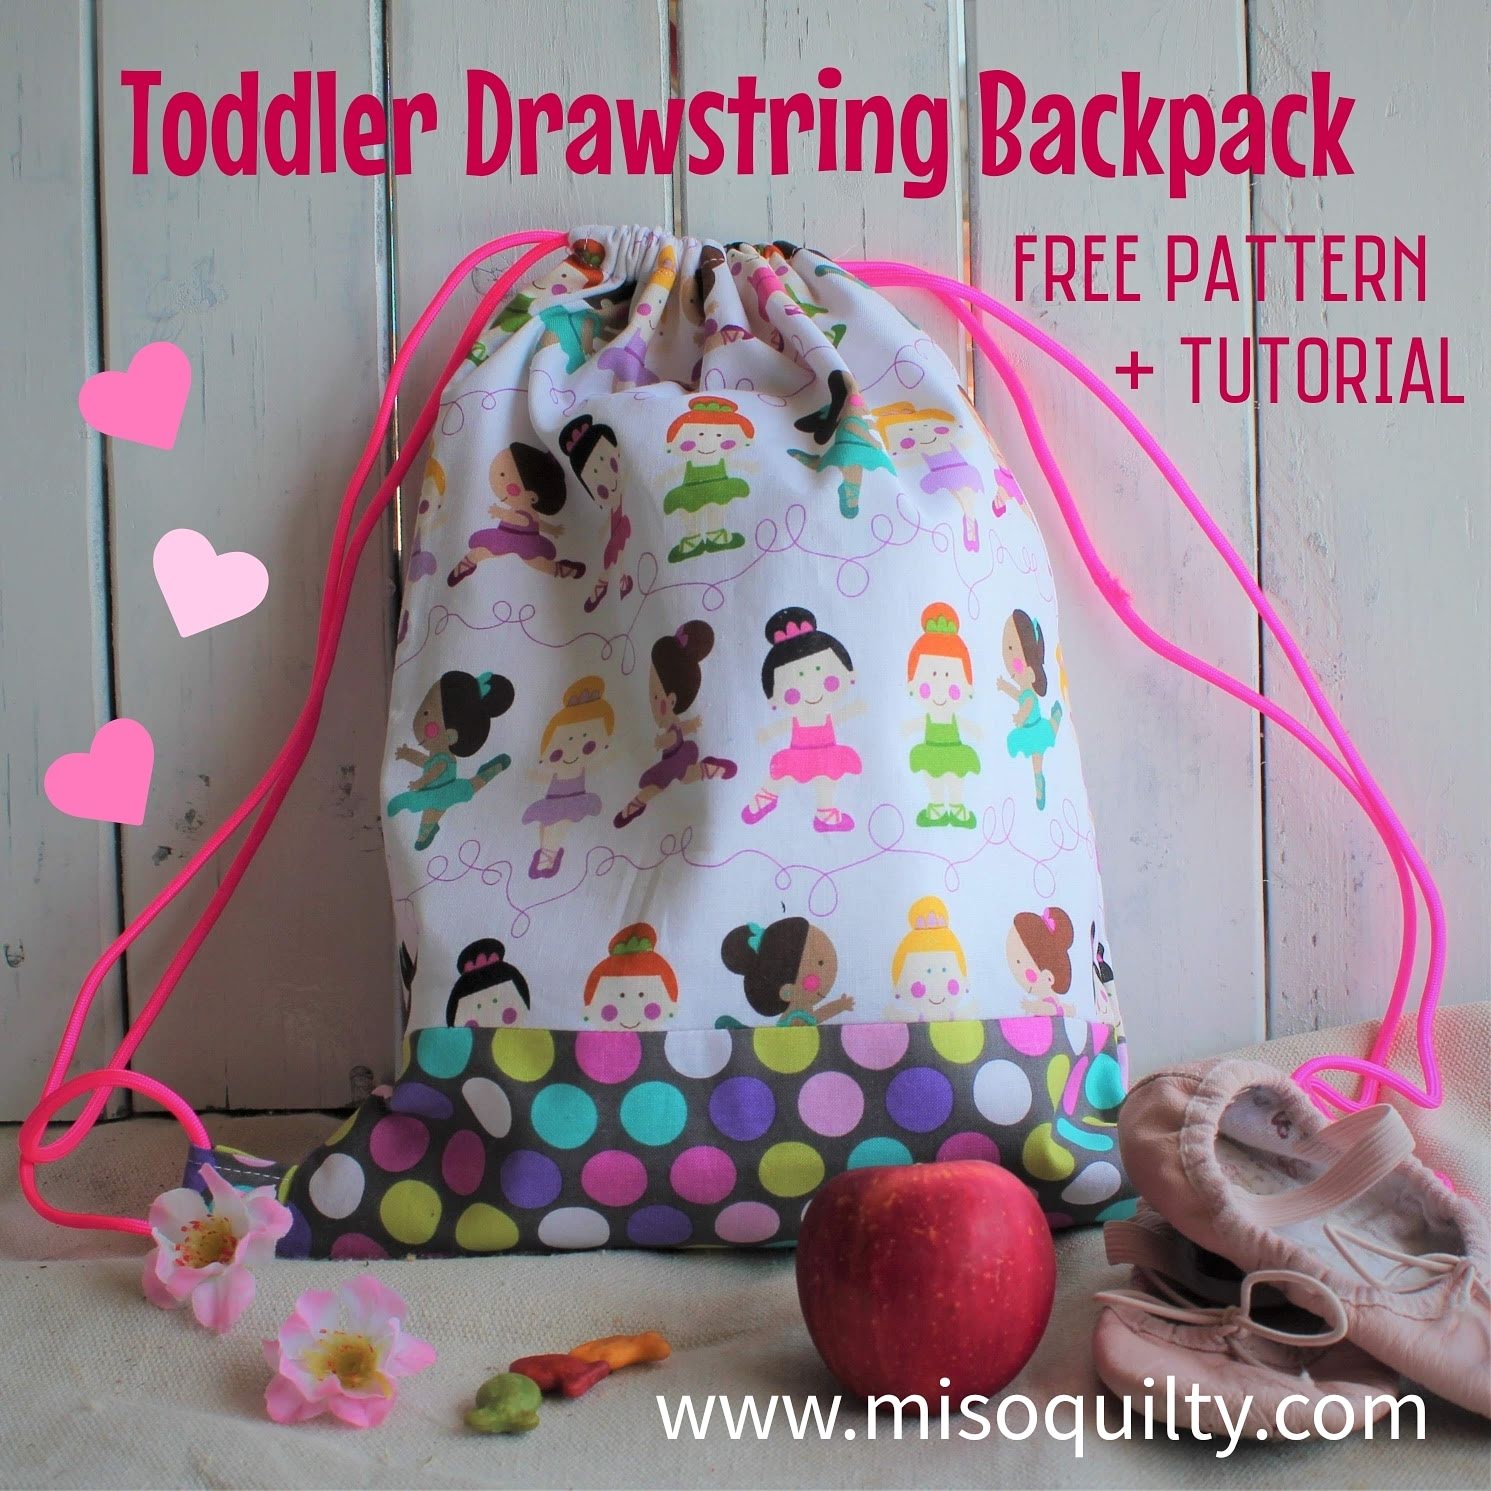 miso-quilty-free-pattern-toddler-drawstring-backpack